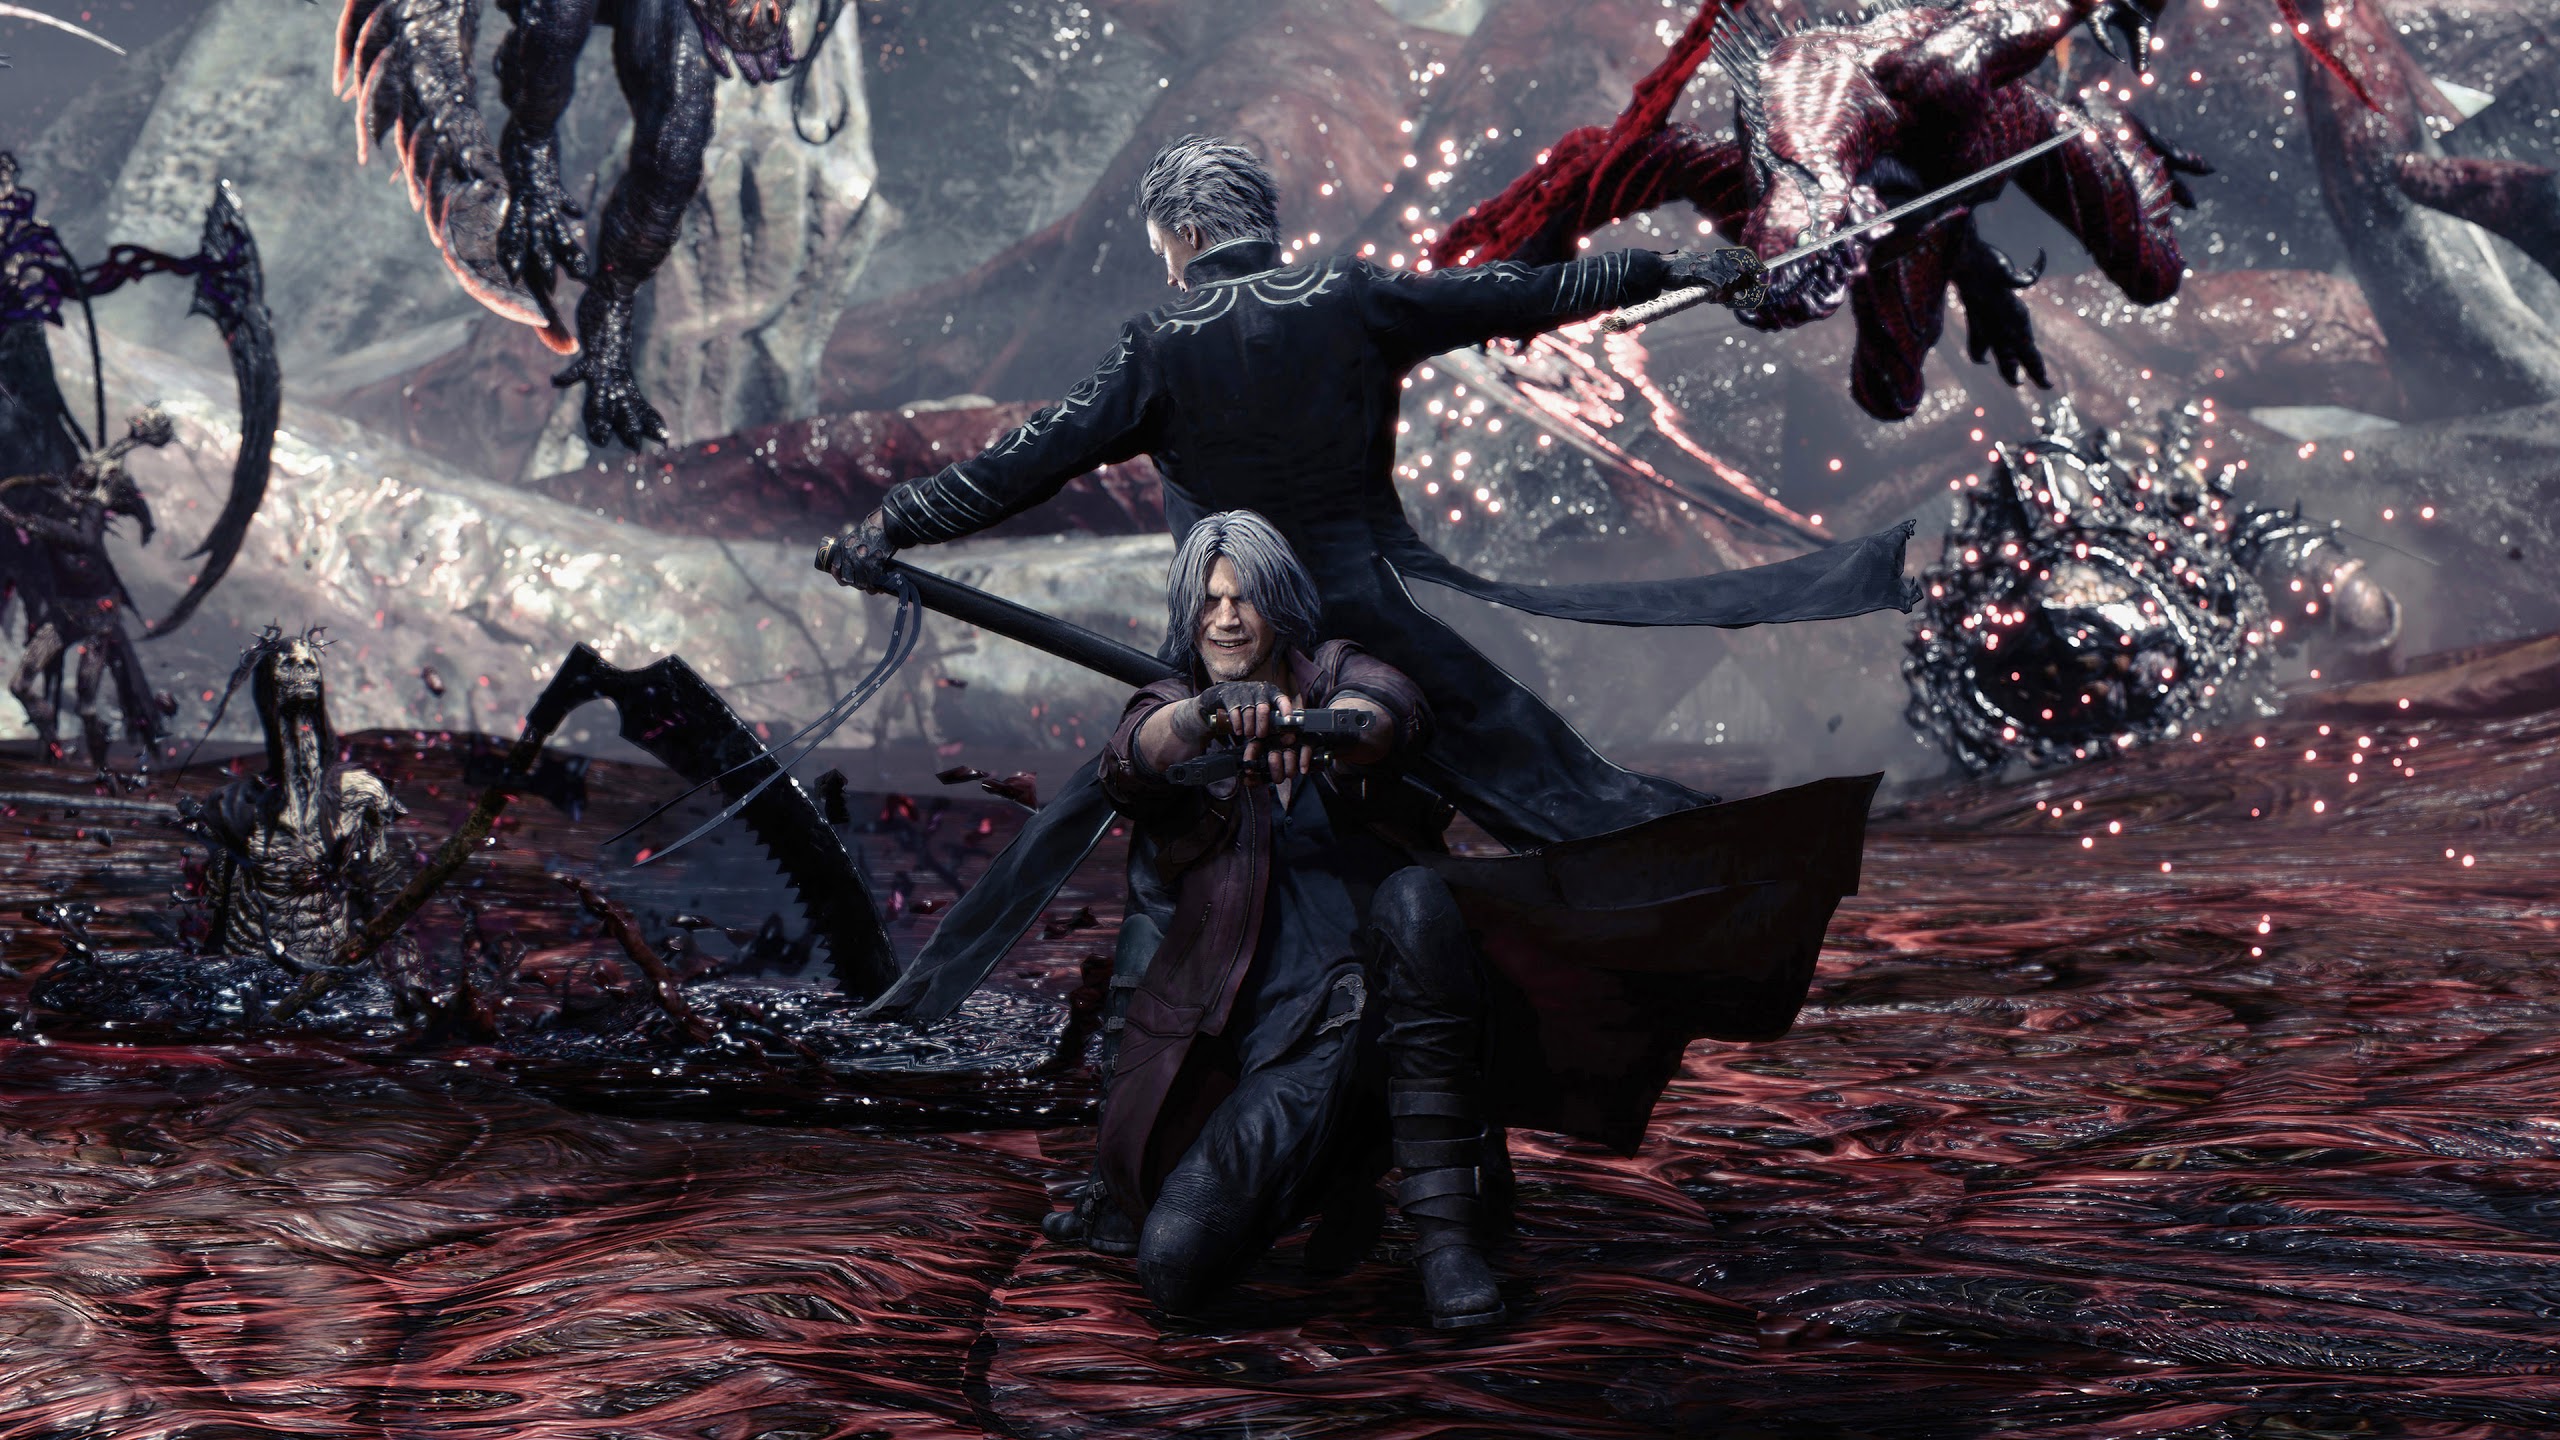 Devil May Cry 5, Dante And Vergil, 4k, - Devil May Cry 5 Dante And Vergil , HD Wallpaper & Backgrounds